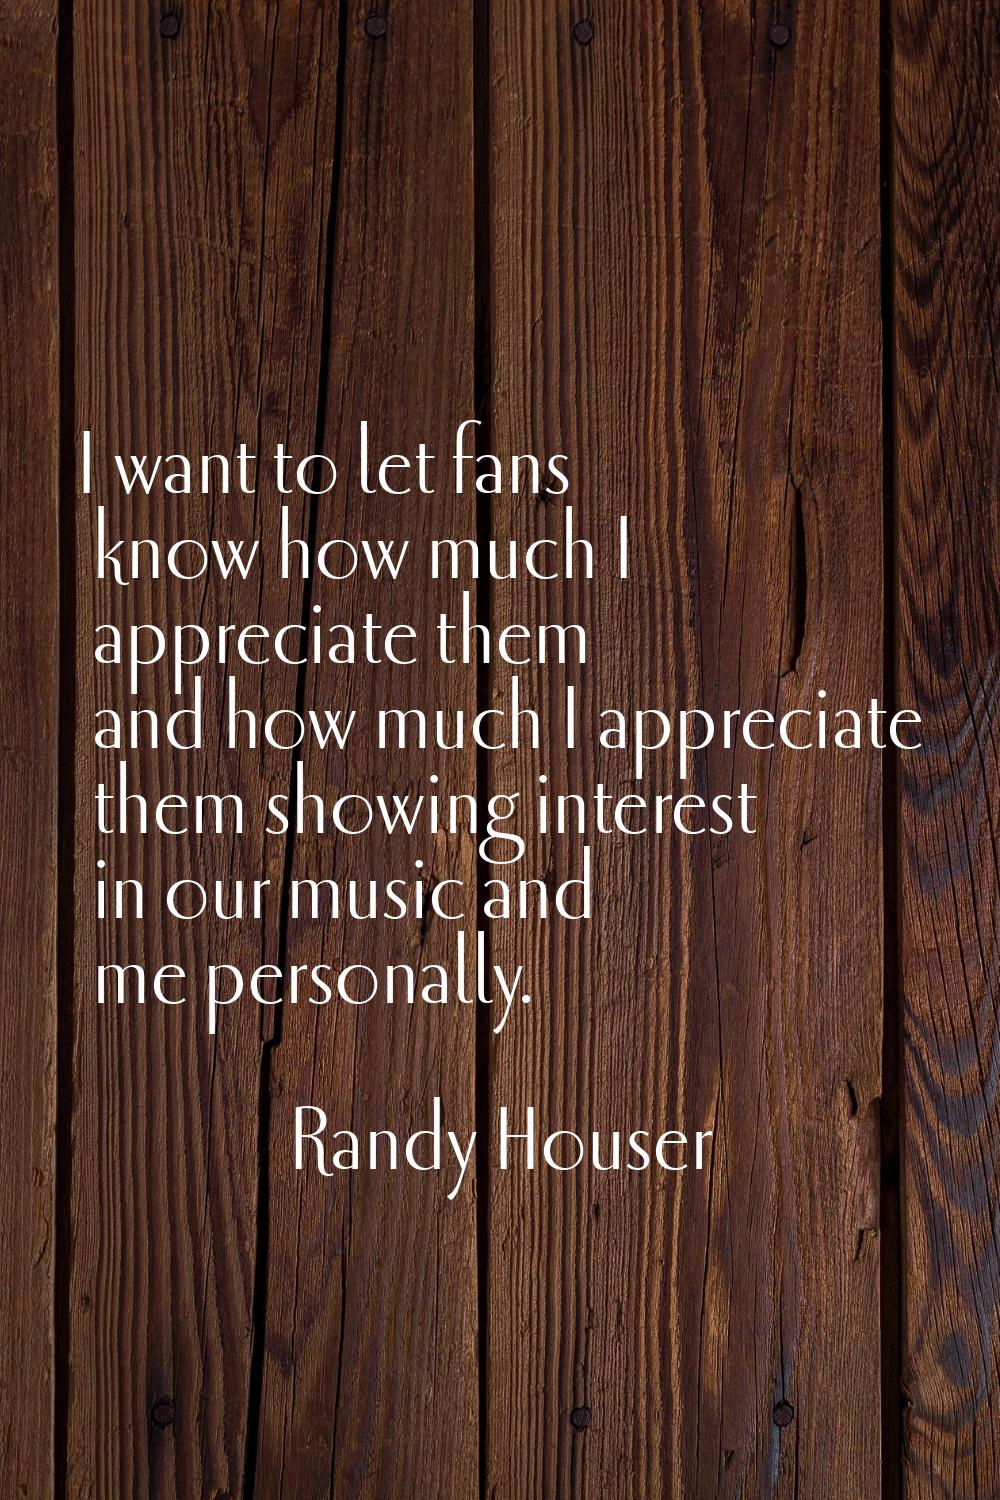 I want to let fans know how much I appreciate them and how much I appreciate them showing interest 